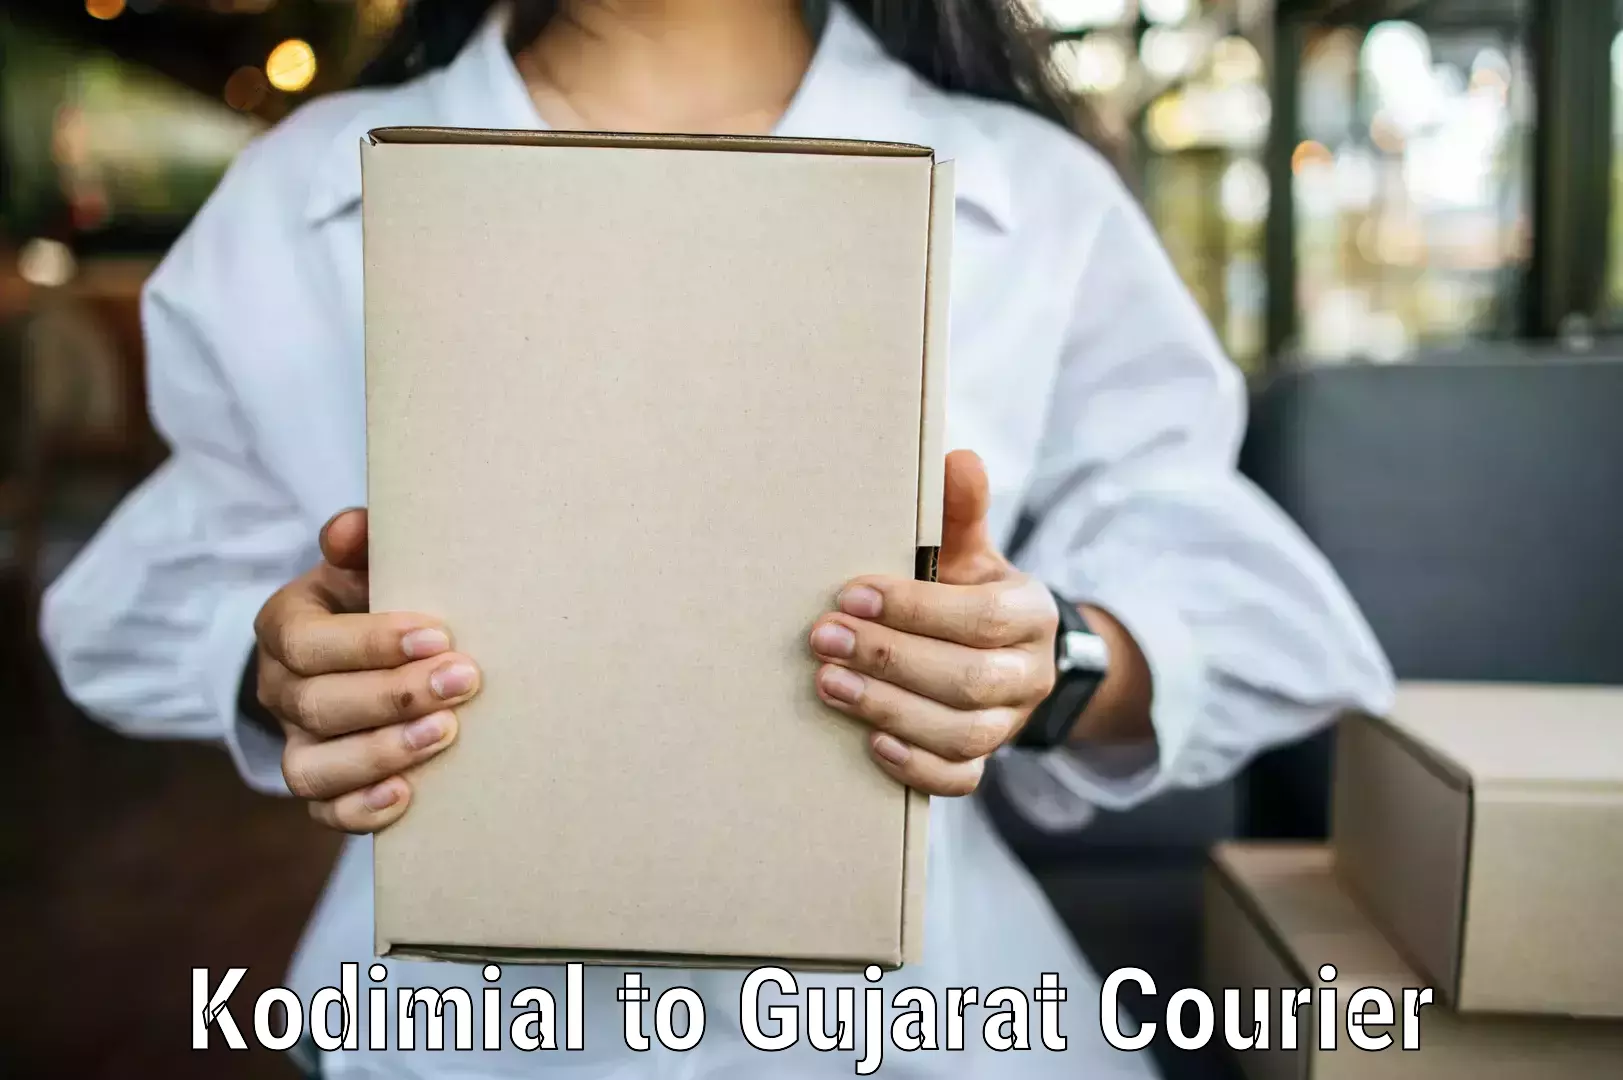 Customer-focused courier Kodimial to Surat